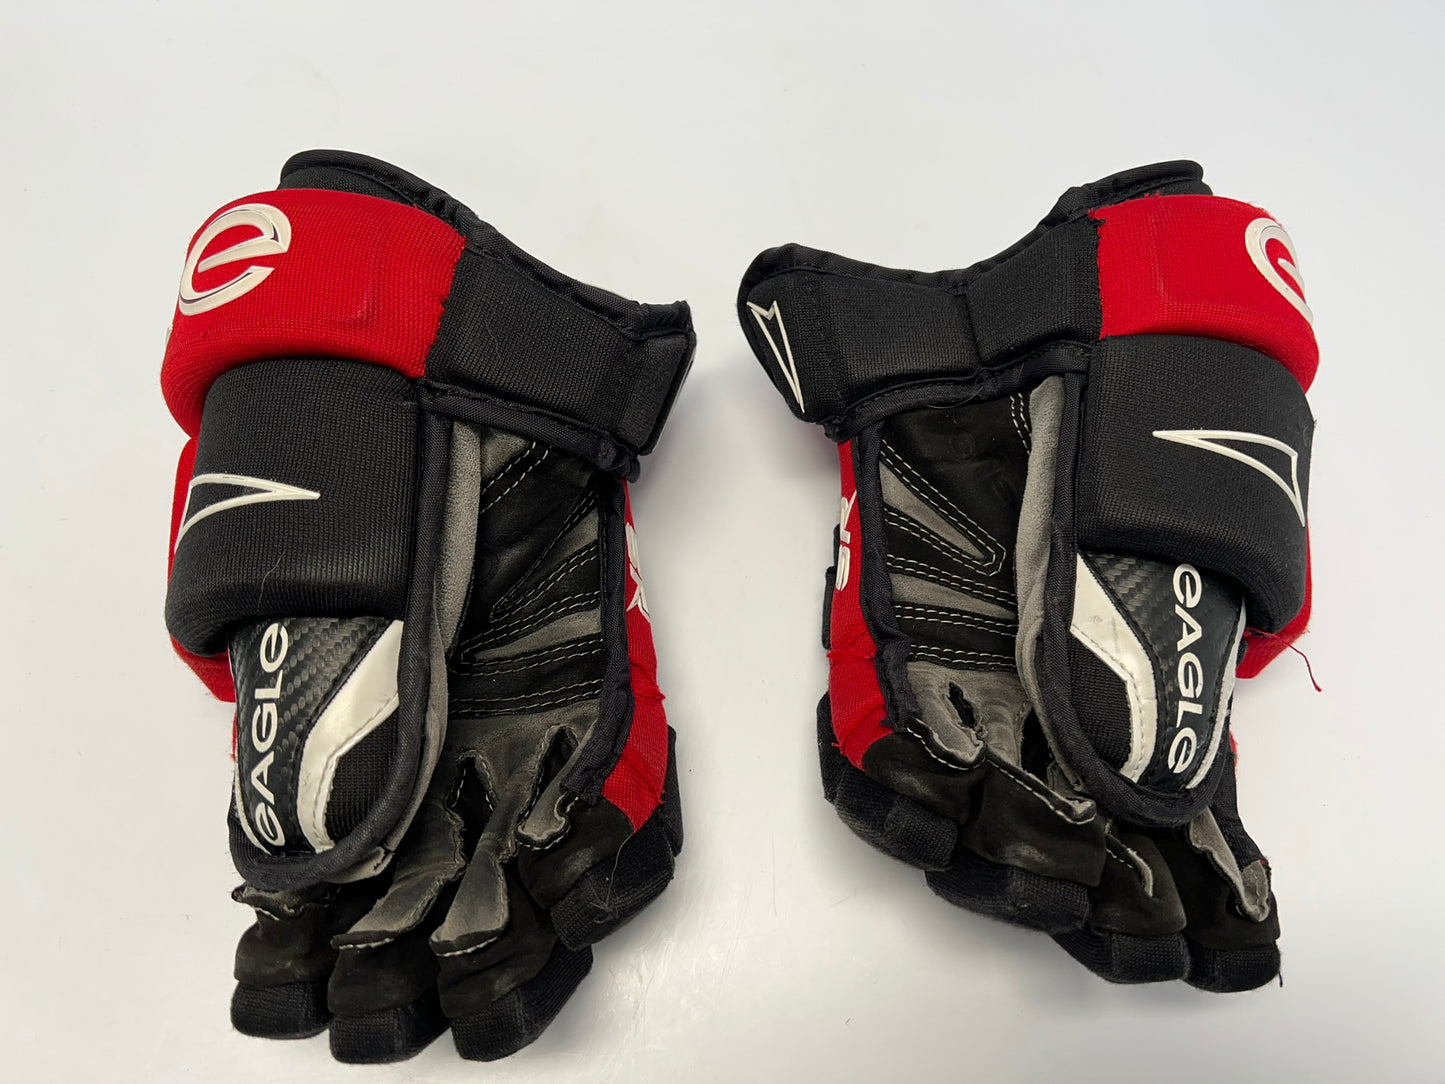 Hockey Gloves Child Junior Size 12" Eagle Aero Pro Quality Black Red Outstanding Quality